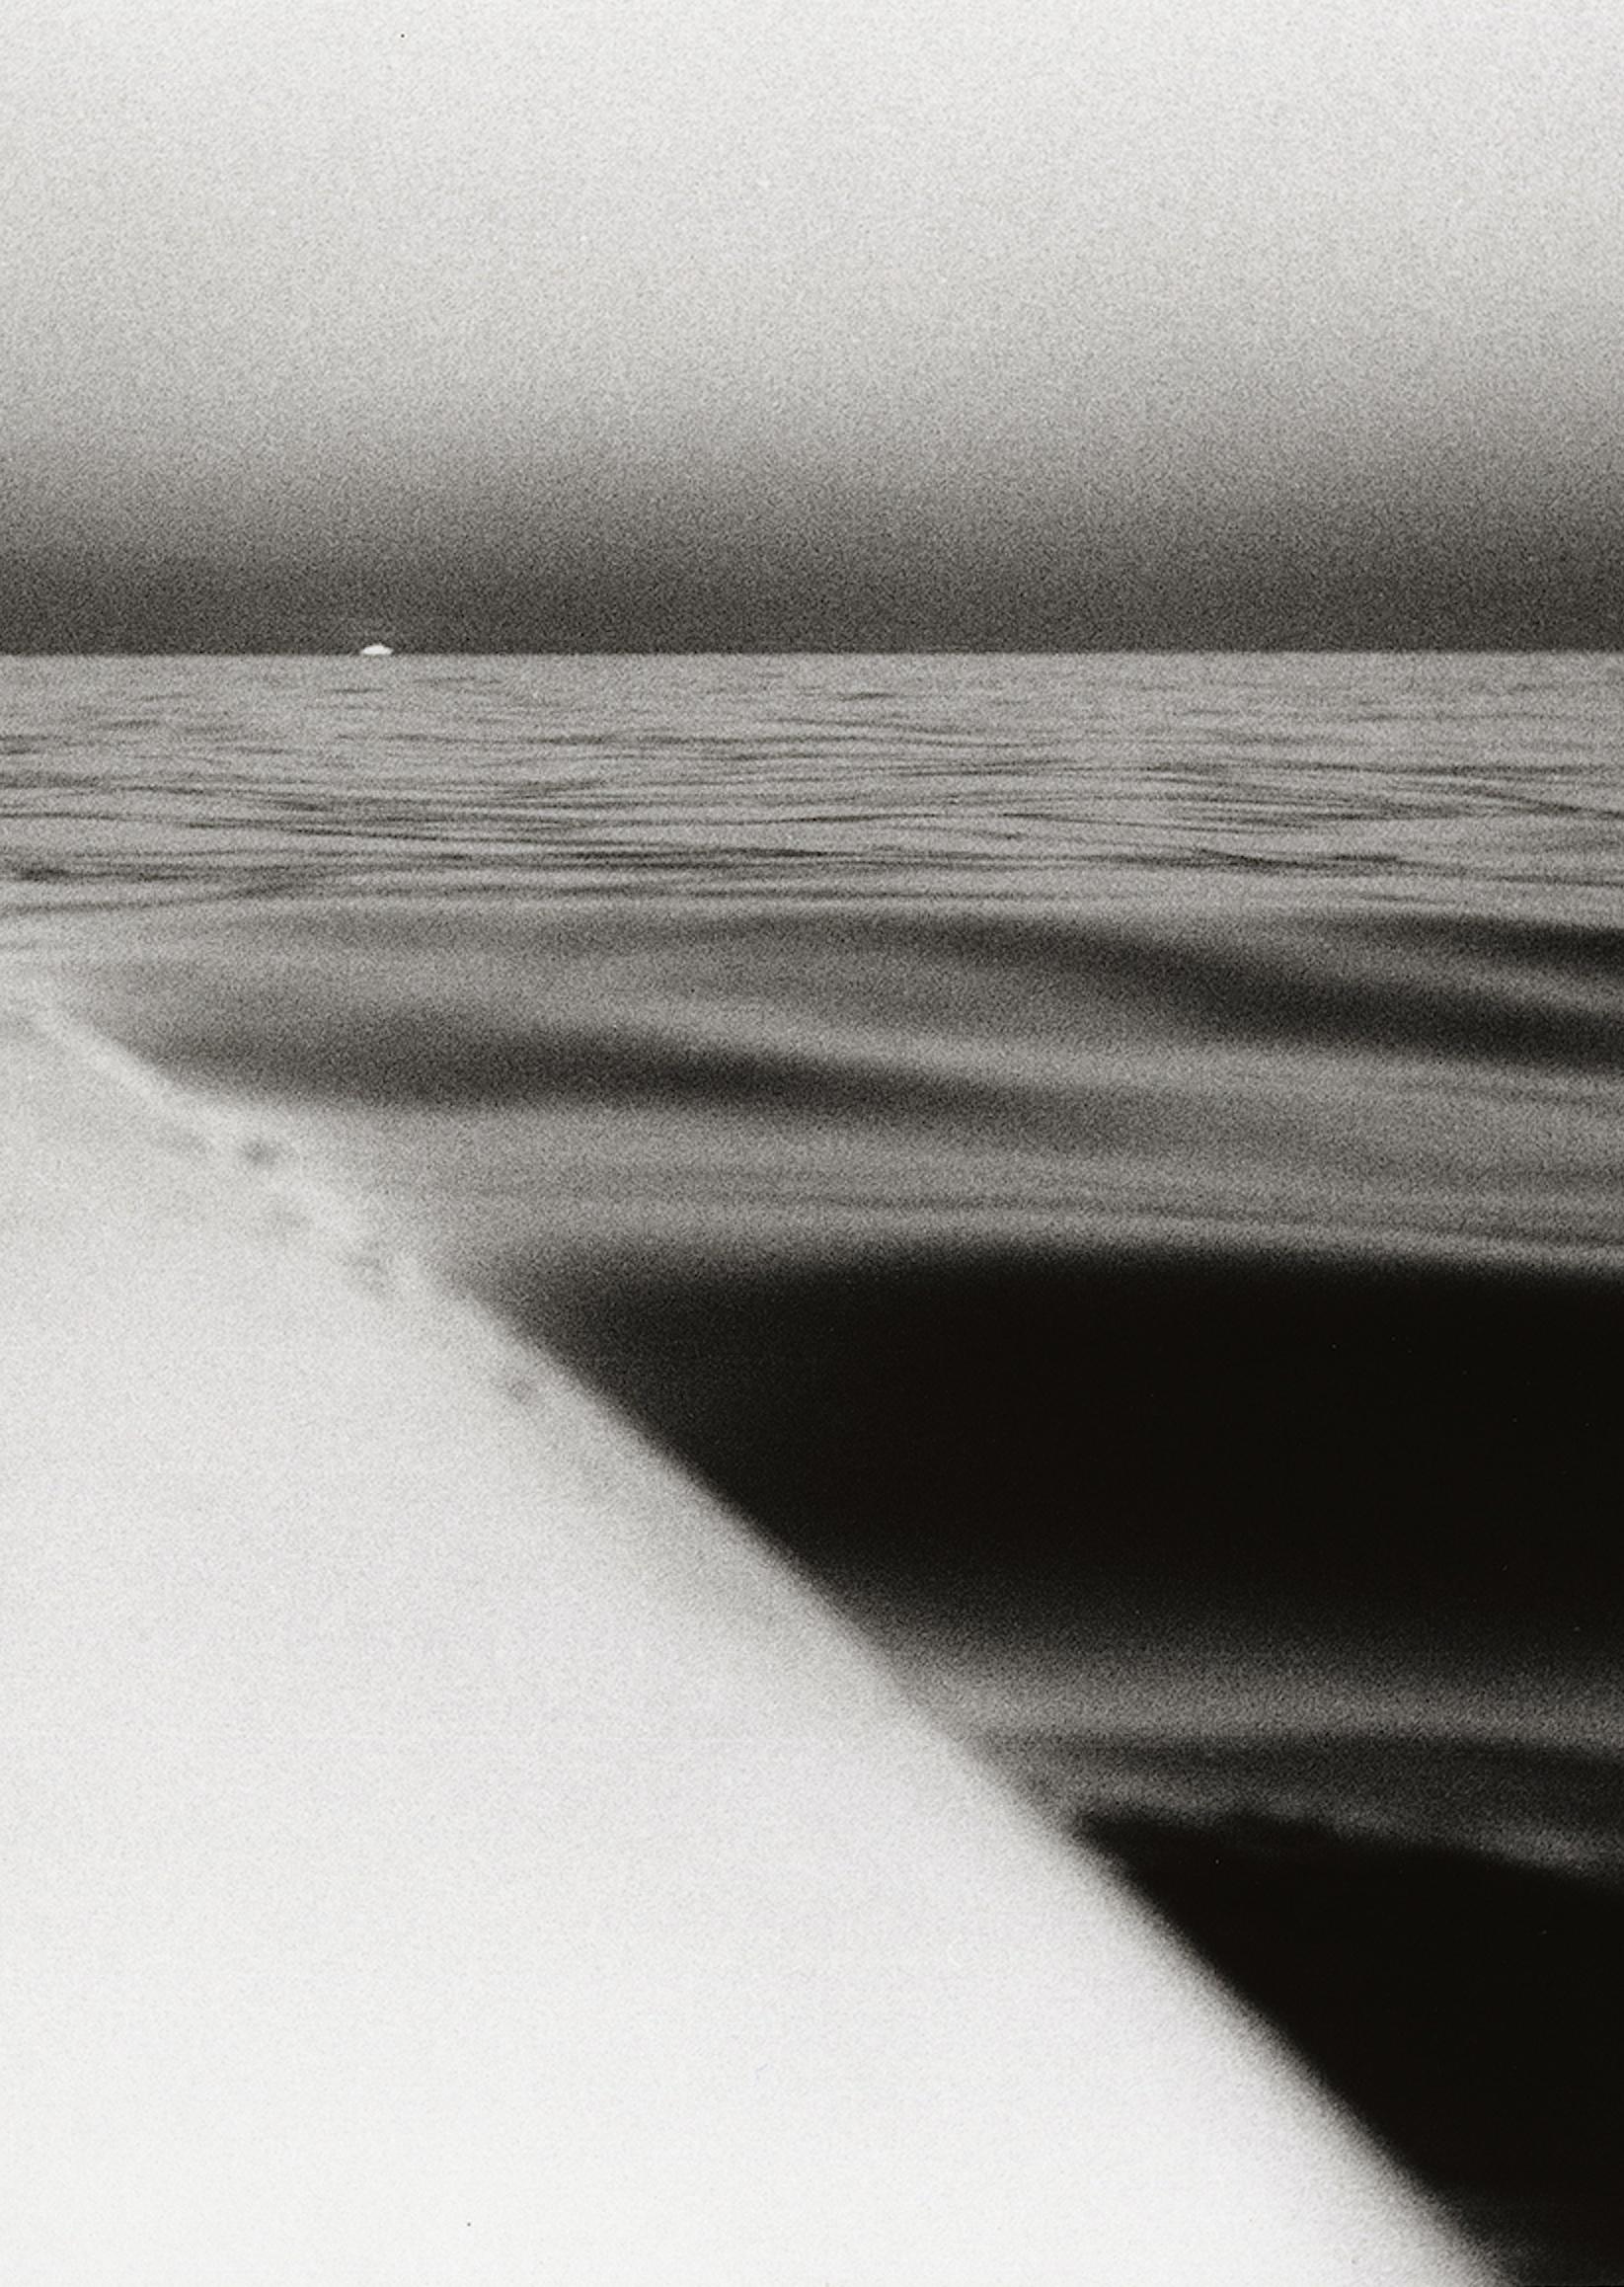 Anthony FRIEDKIN (*1949, America)
Surfboard with Setting Sun, Santa Monica, California, U.S.A., 1980
Silver Gelatin Print, later print
40.6 x 50.8 cm (16 x 20 in.)
Edition of 25
Print only

Born 1949 in Los Angeles, USA, Friedkin currently lives and